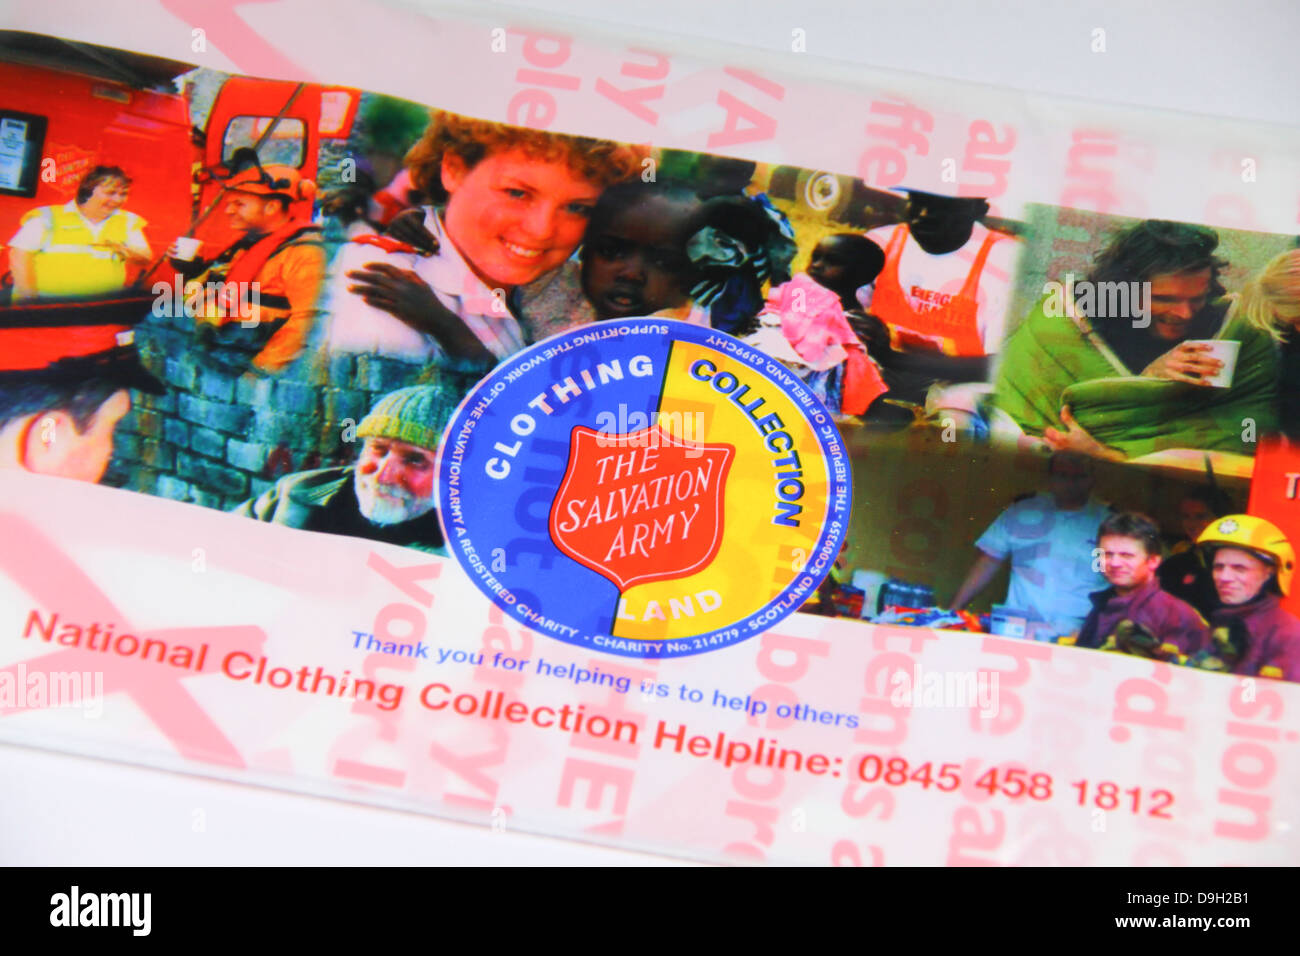 Salvation Army charity clothes collection bag Stock Photo